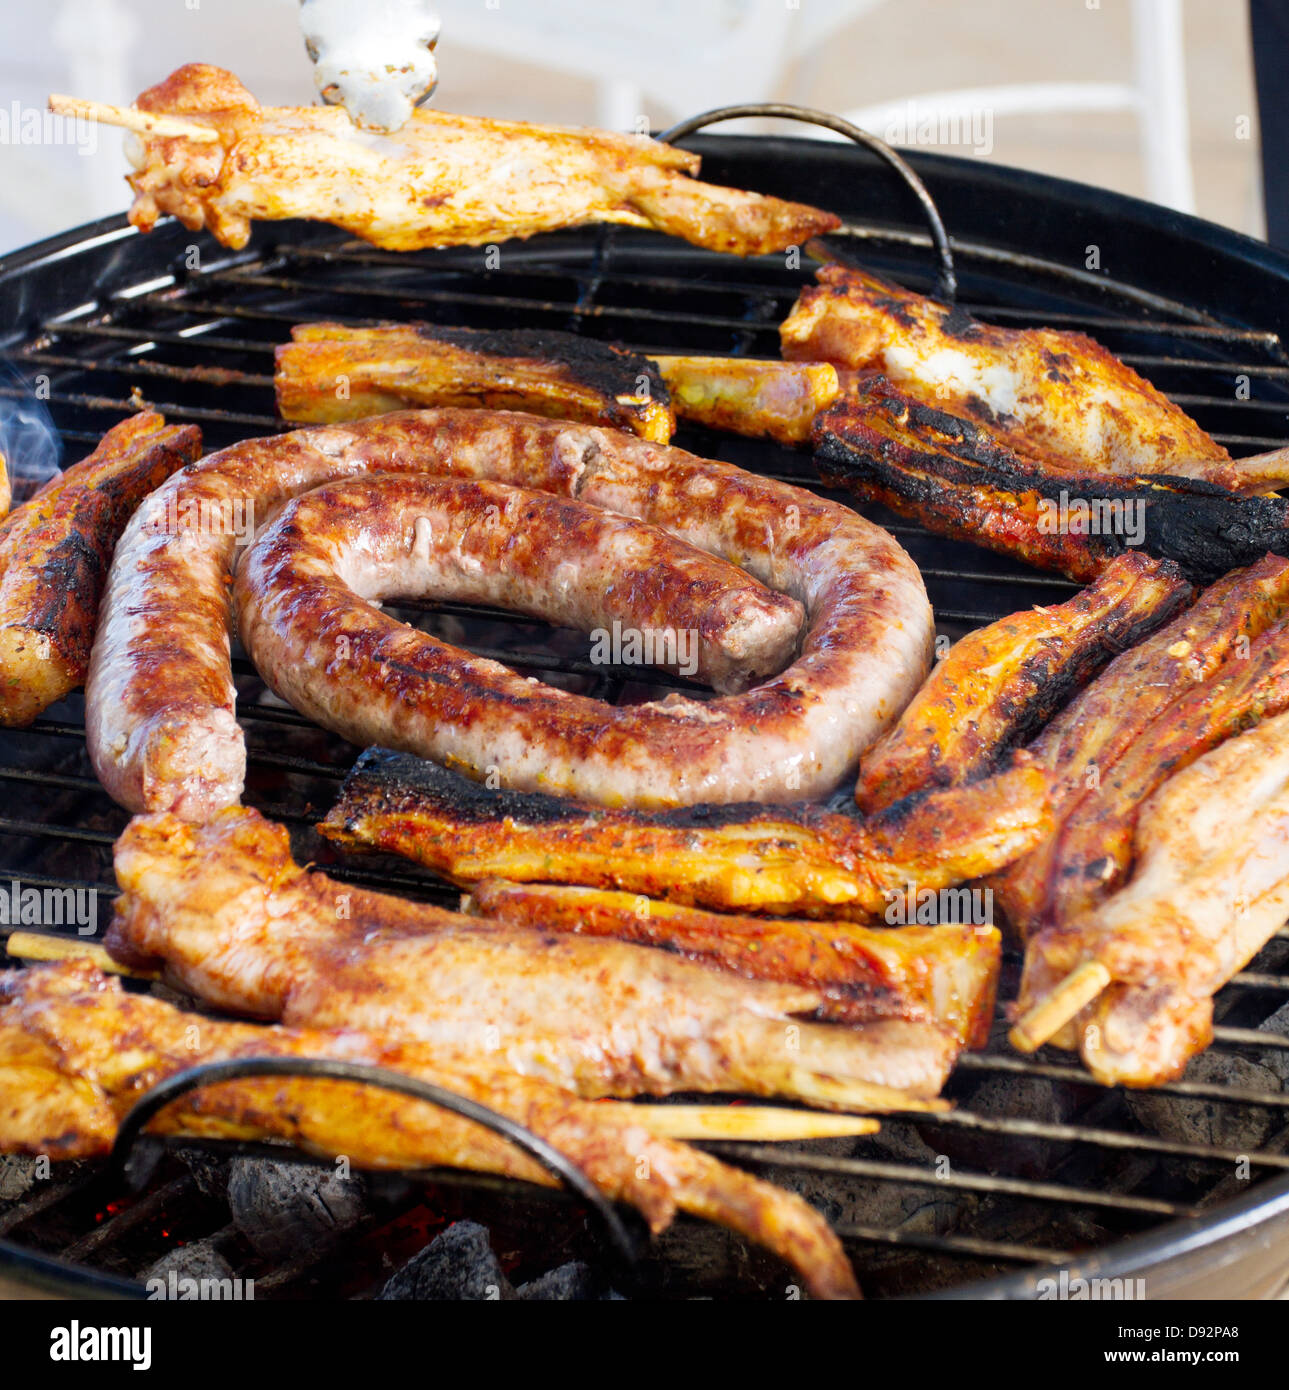 South African Style Barbecue - Grill Stockfoto